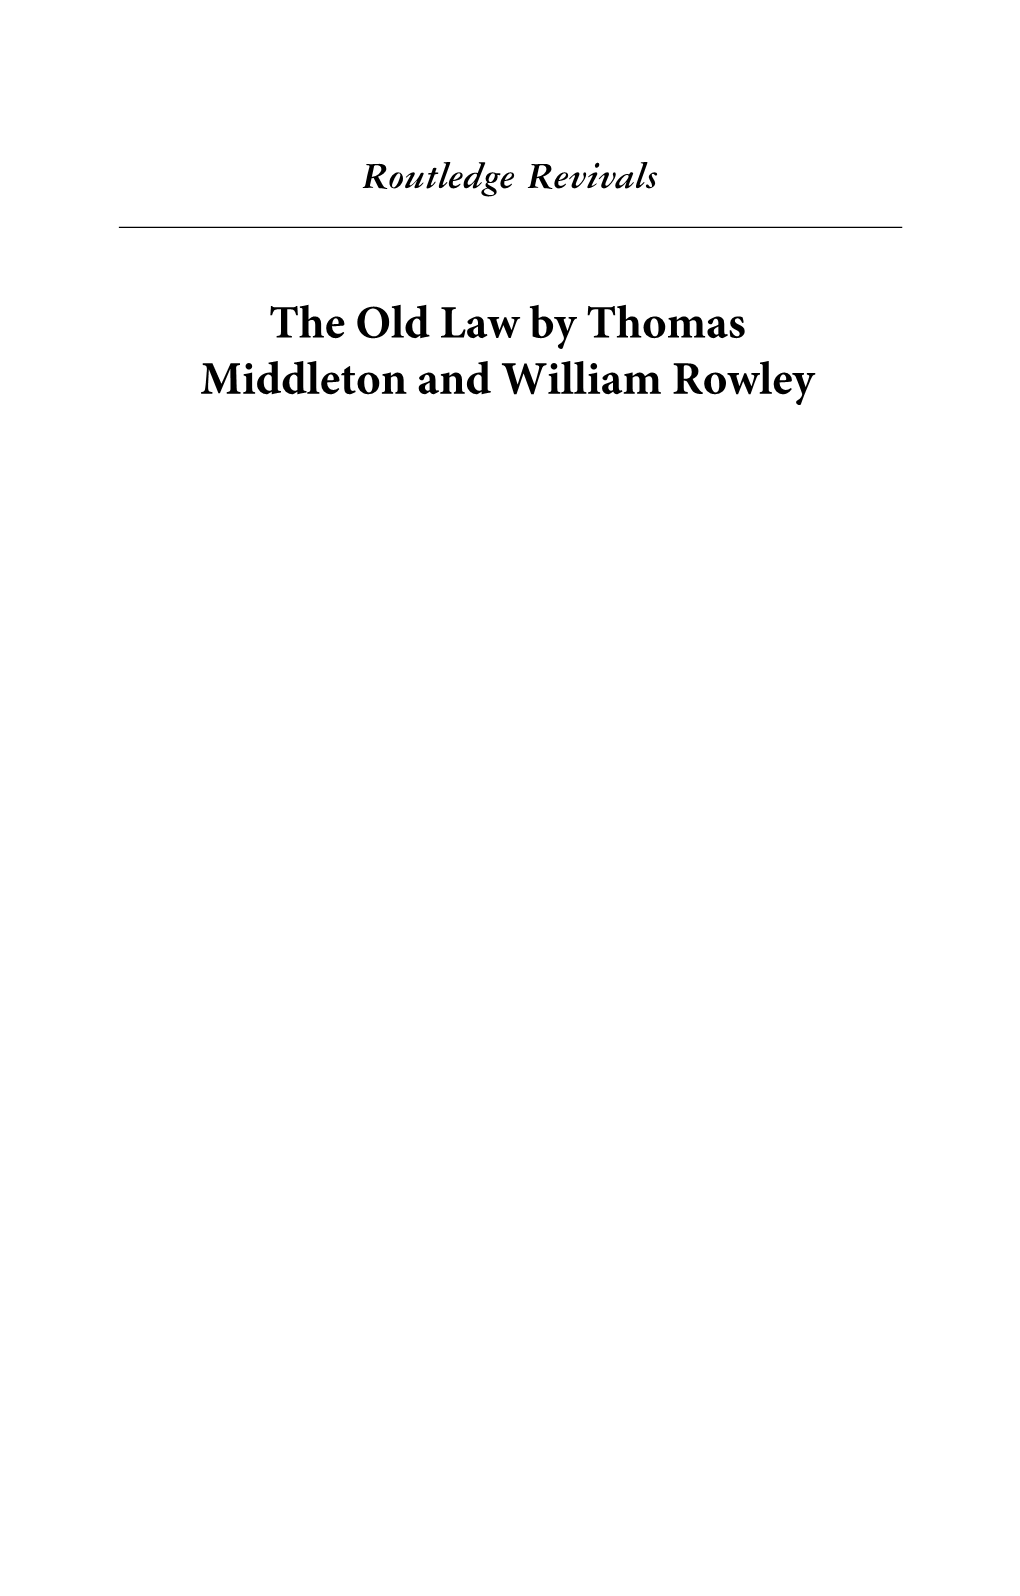 The Old Law by Thomas Middleton and William Rowley